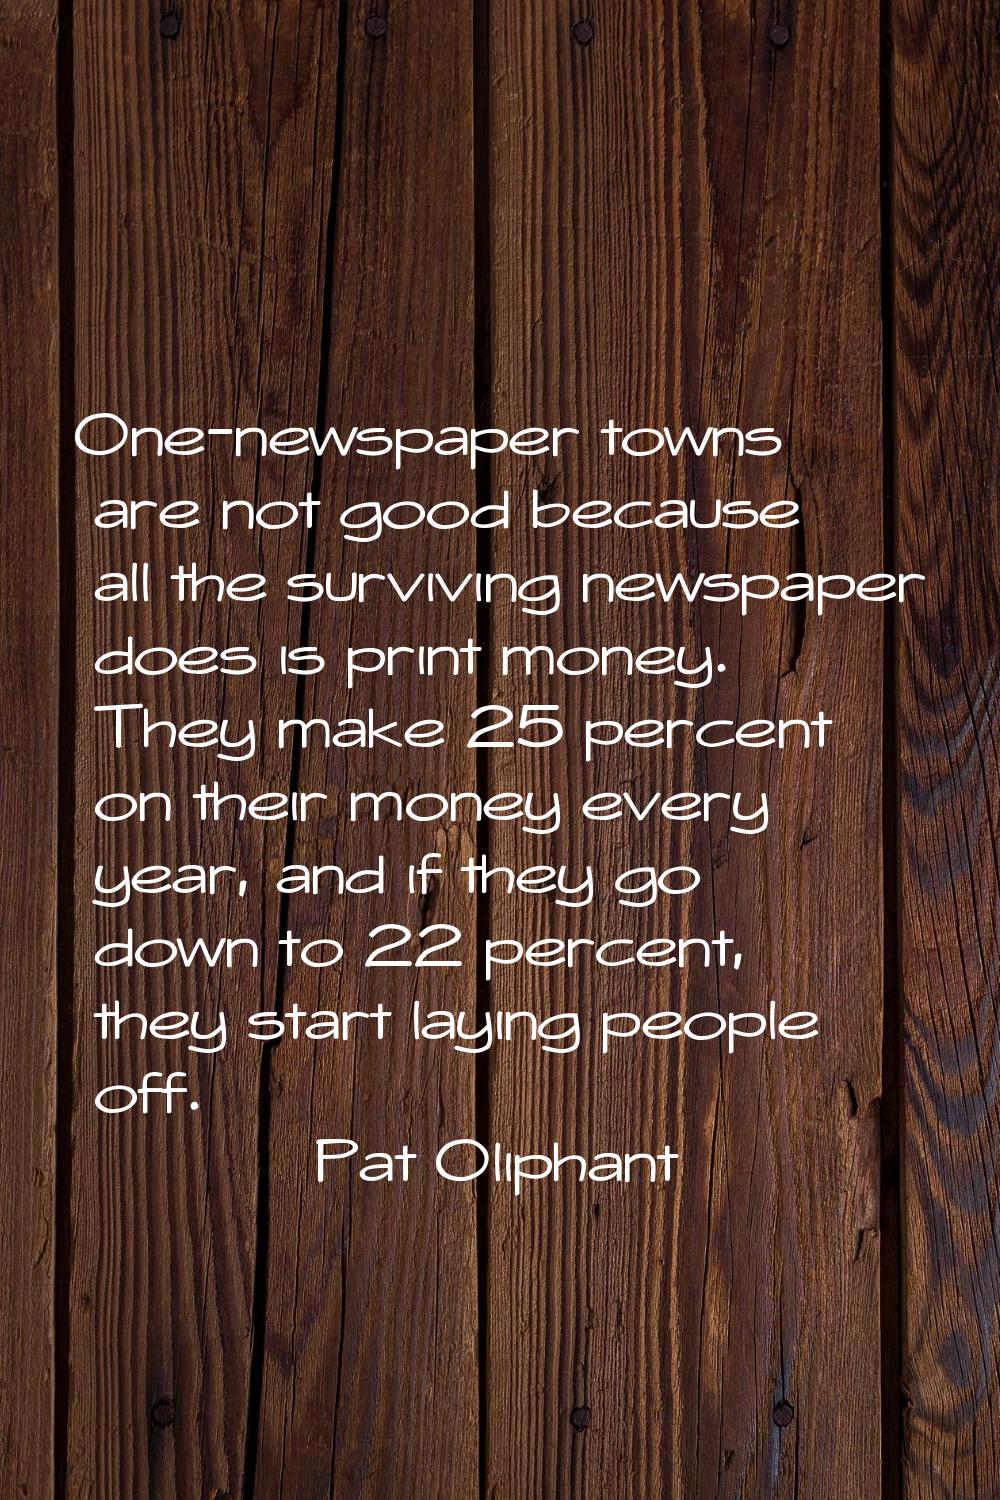 One-newspaper towns are not good because all the surviving newspaper does is print money. They make